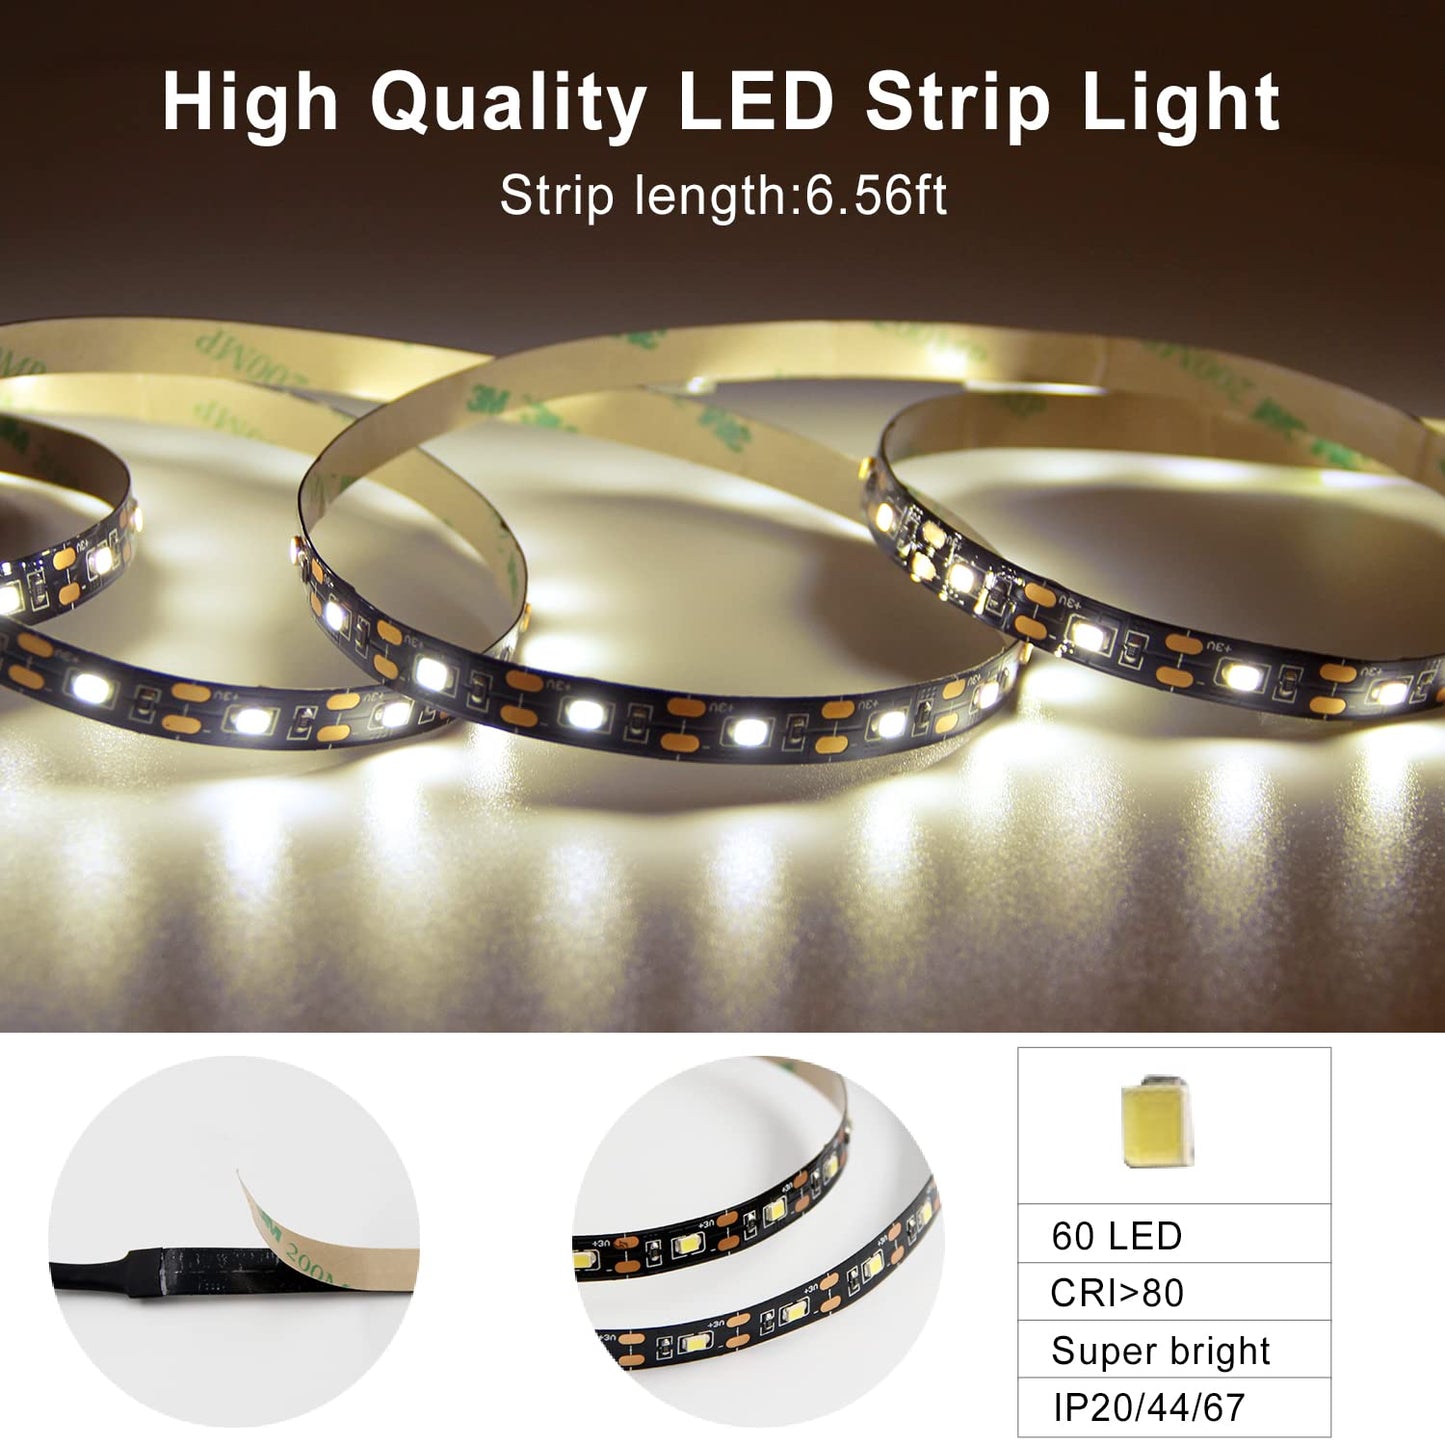 Send an inquiry for 3V Motion Activated LED Light Strip 4W Battery Powered LED Tape Light with Easy Installtion for Wardrobe,Bedroom 6.56ft 3000K supplier. Wholesale Motion Activated LED Light Strip directly from China Battery Powered LED Tape Light manufacturers/exporters. Get factory sale price list and become a distributor/agent-vstled.com